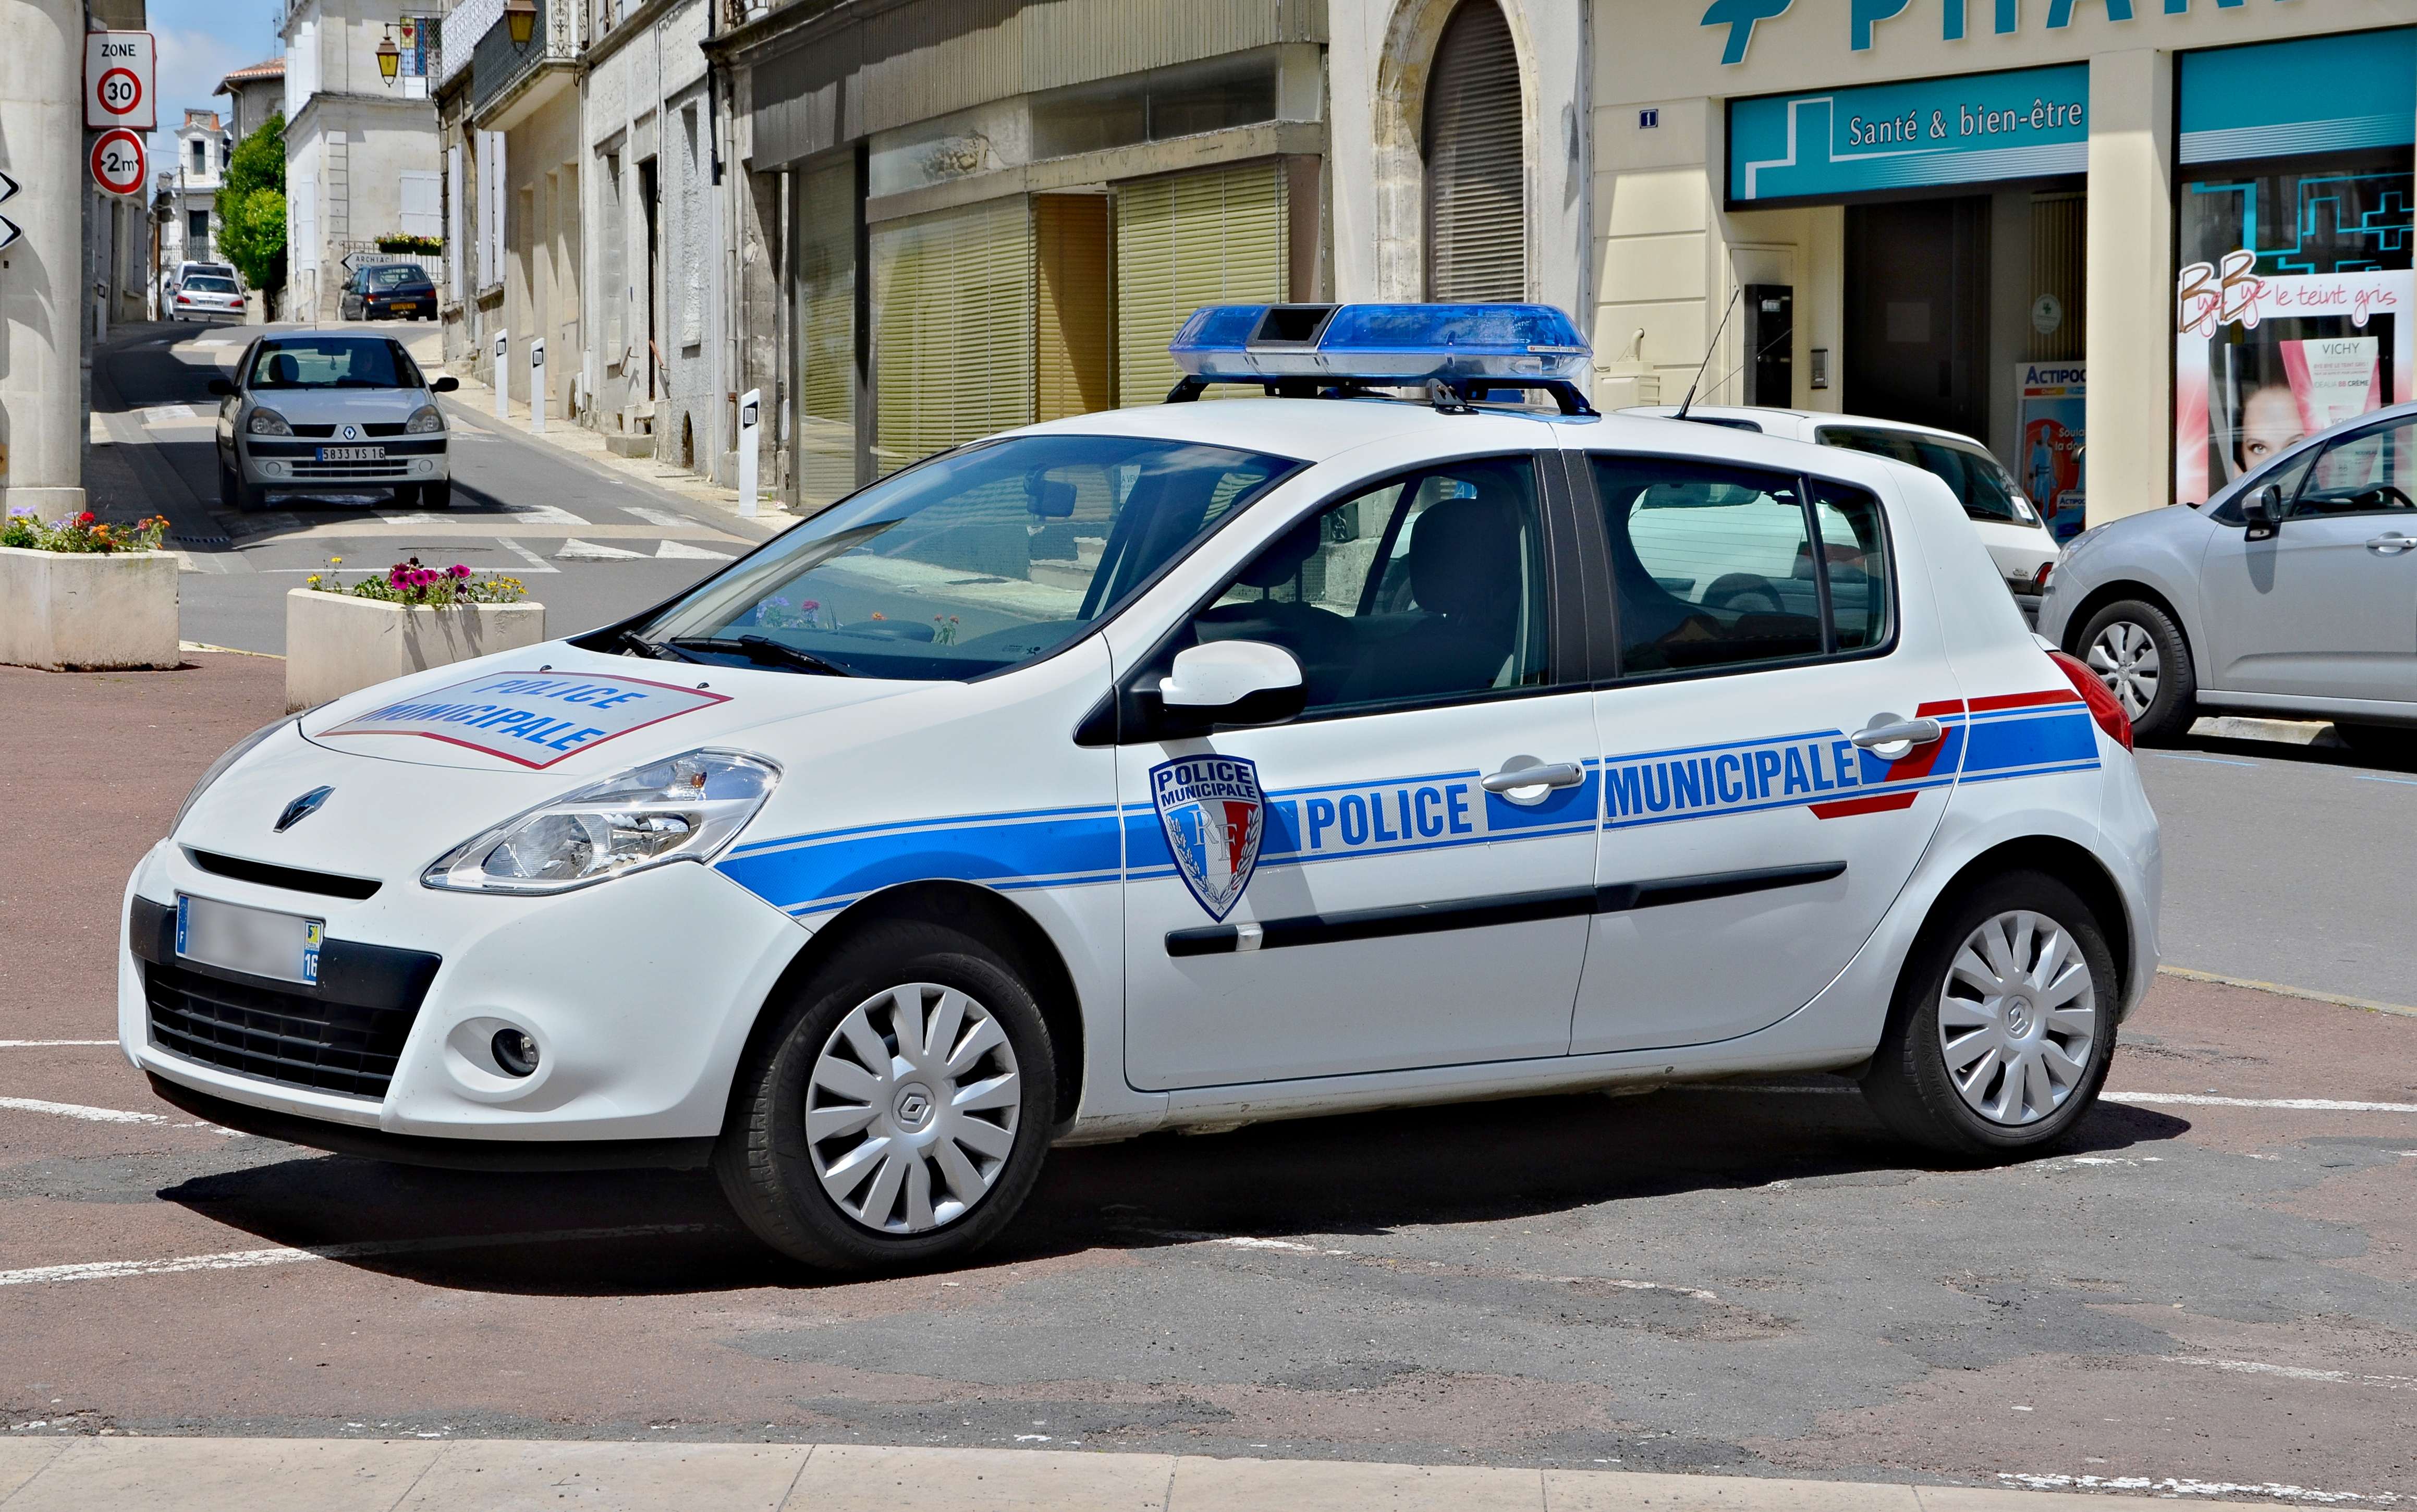 Chateauneuf 16 Clio Police Mun. 2013